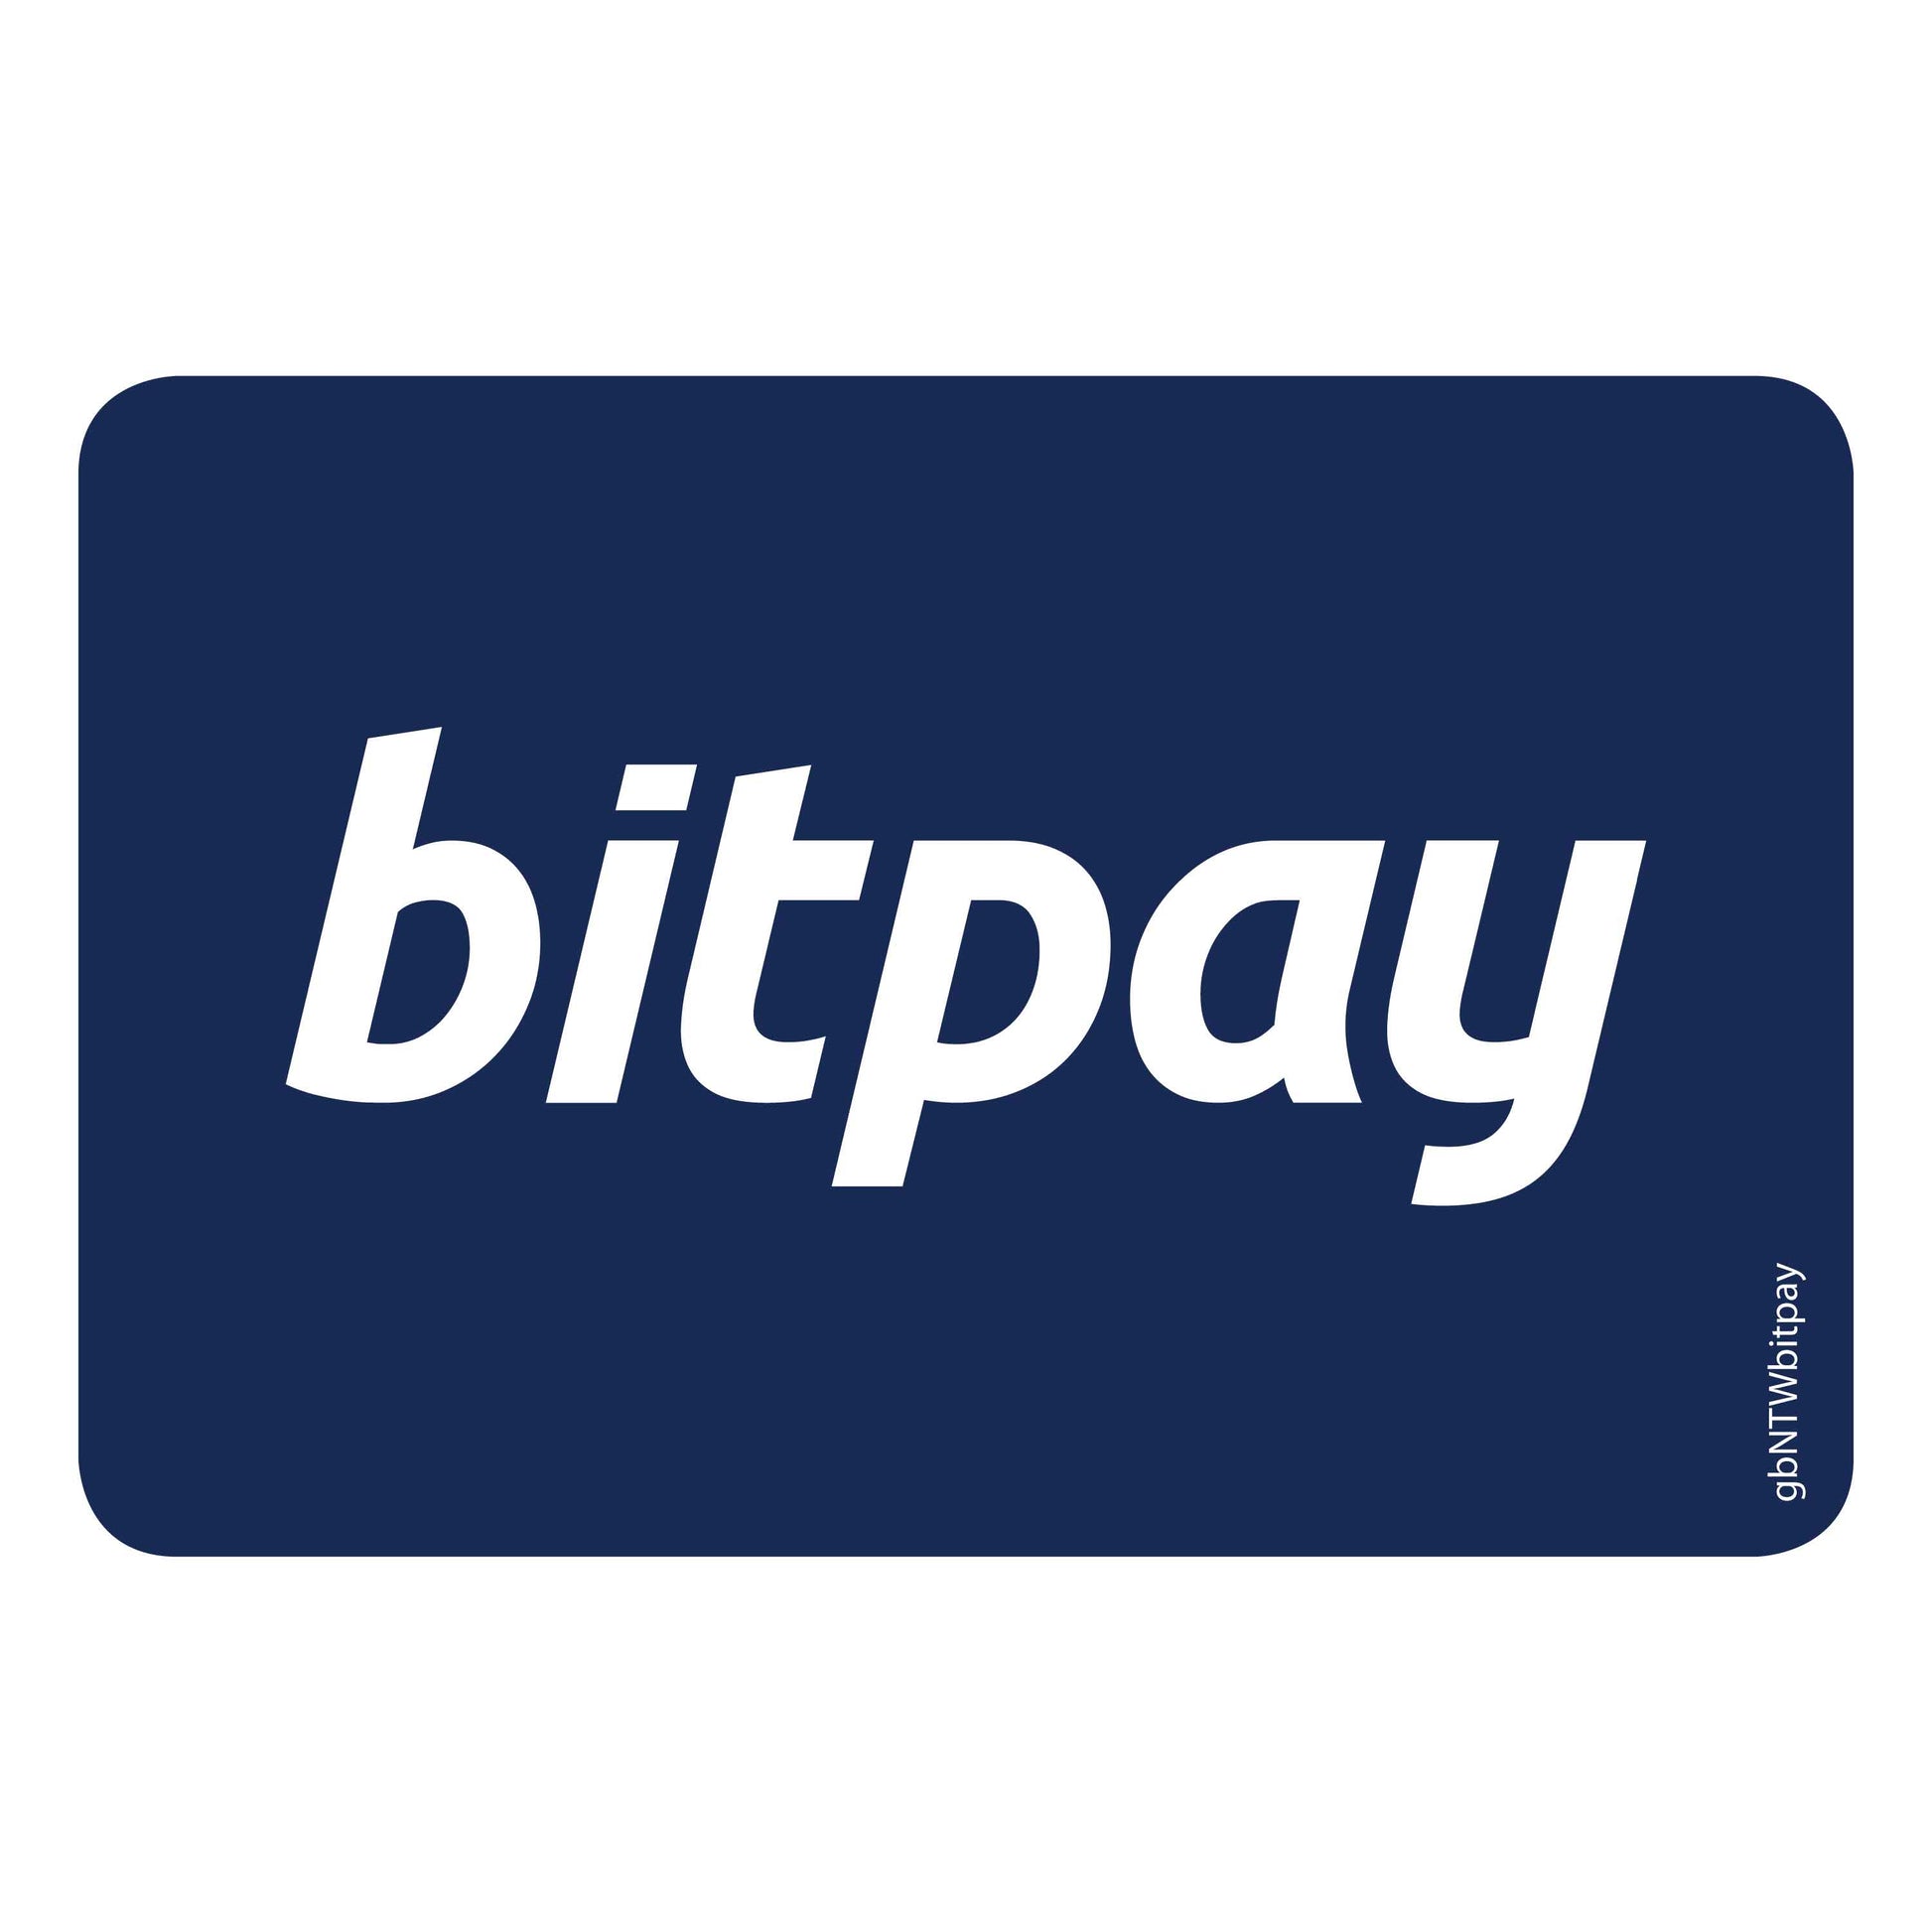 Single Network Decal, Bitpay Blue. 3 inches by 2 inches in size.